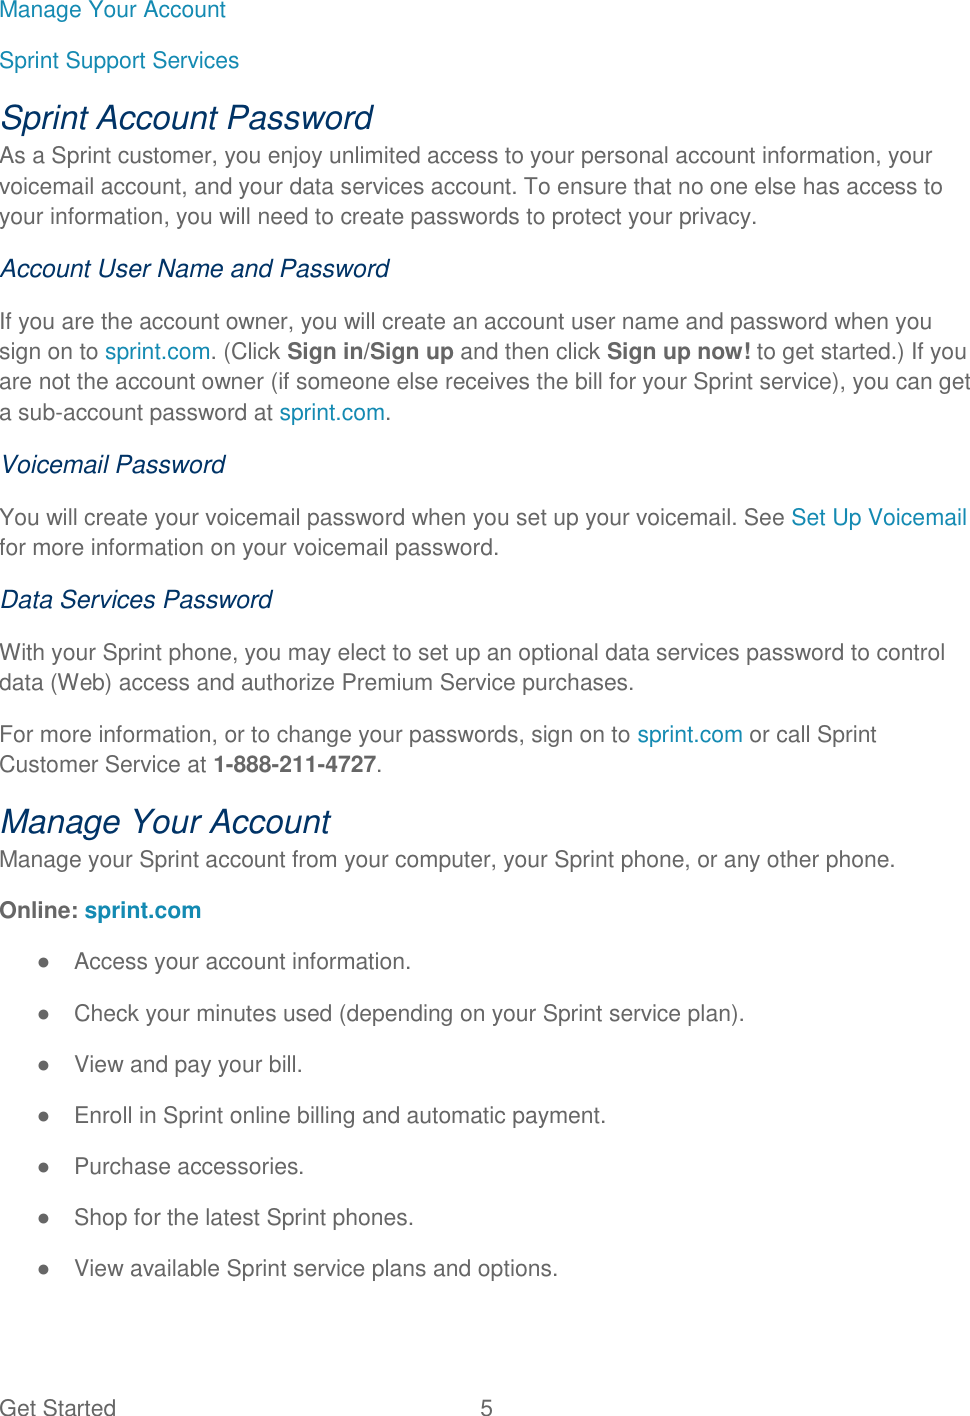 Get Started  5   Manage Your Account Sprint Support Services Sprint Account Password As a Sprint customer, you enjoy unlimited access to your personal account information, your voicemail account, and your data services account. To ensure that no one else has access to your information, you will need to create passwords to protect your privacy. Account User Name and Password If you are the account owner, you will create an account user name and password when you sign on to sprint.com. (Click Sign in/Sign up and then click Sign up now! to get started.) If you are not the account owner (if someone else receives the bill for your Sprint service), you can get a sub-account password at sprint.com. Voicemail Password You will create your voicemail password when you set up your voicemail. See Set Up Voicemail for more information on your voicemail password. Data Services Password With your Sprint phone, you may elect to set up an optional data services password to control data (Web) access and authorize Premium Service purchases. For more information, or to change your passwords, sign on to sprint.com or call Sprint Customer Service at 1-888-211-4727. Manage Your Account Manage your Sprint account from your computer, your Sprint phone, or any other phone. Online: sprint.com ●  Access your account information. ●  Check your minutes used (depending on your Sprint service plan). ●  View and pay your bill. ●  Enroll in Sprint online billing and automatic payment. ●  Purchase accessories. ●  Shop for the latest Sprint phones. ●  View available Sprint service plans and options. 